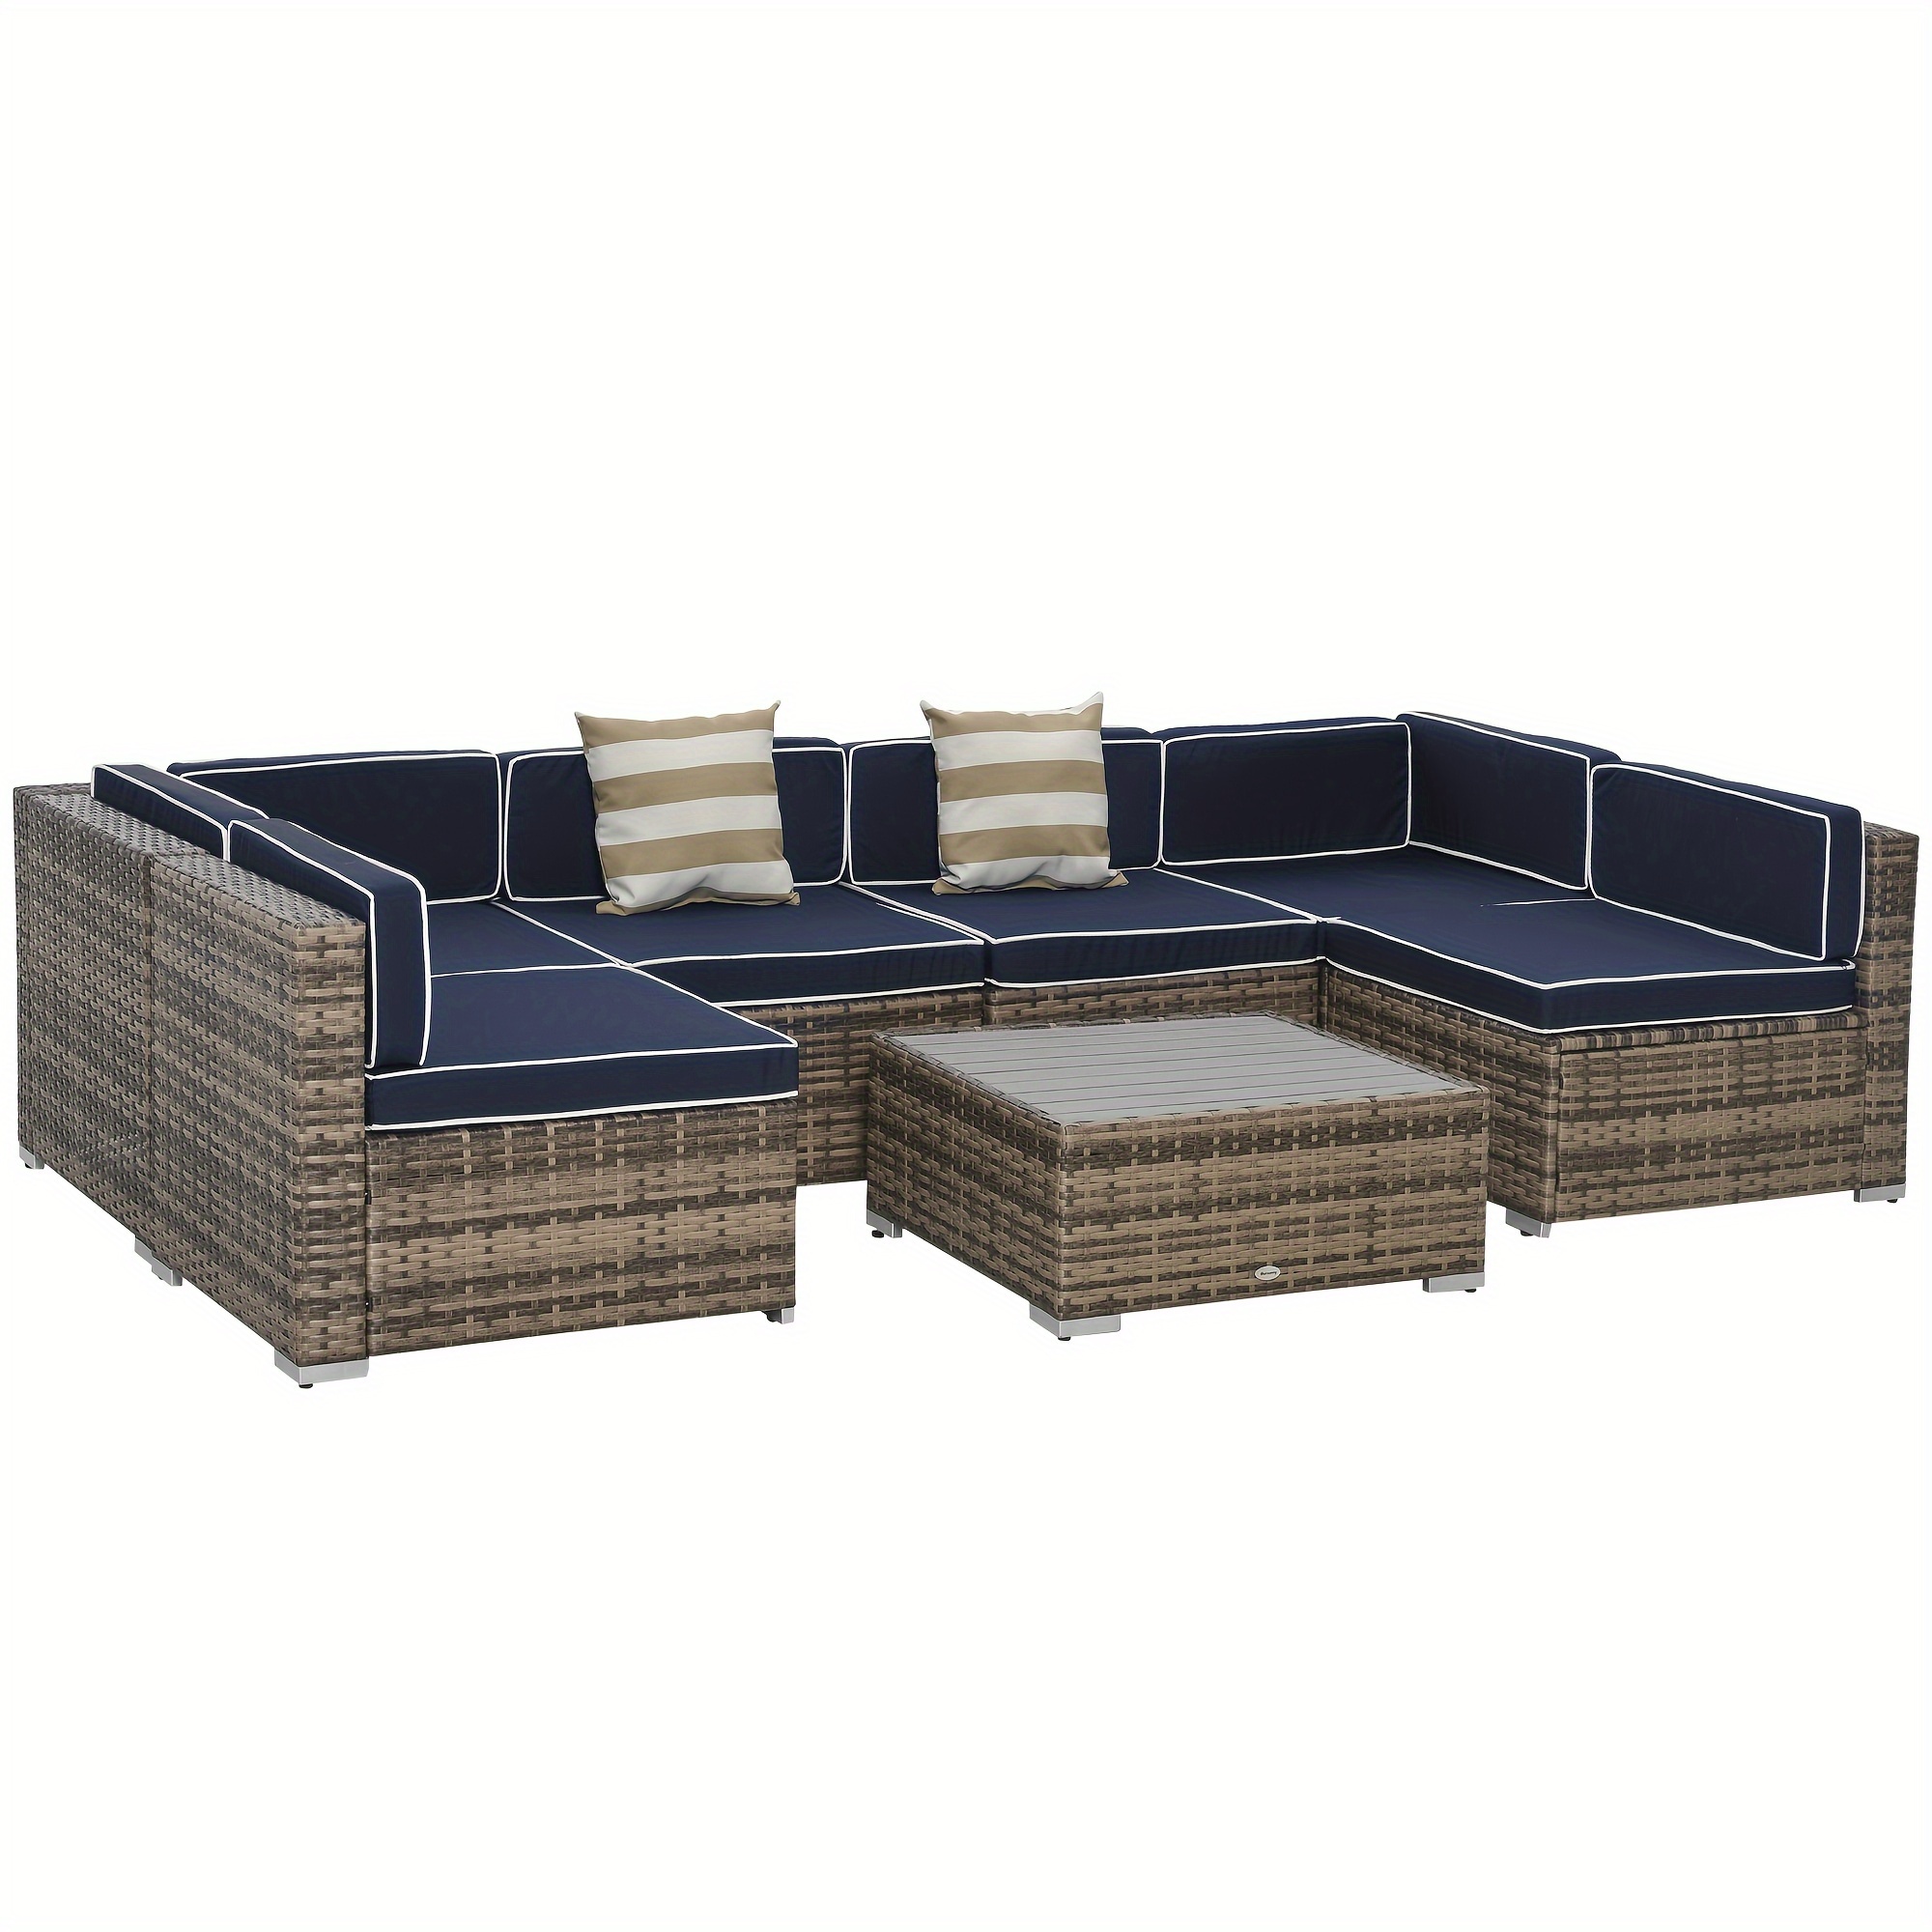 

Outsunny 7-piece Patio Furniture Set, Outdoor Wicker Conversation Set, All Weather Pe Rattan Sectional Sofa Set With Cushions And Faux Wood Table, Stripe Pillows, Blue